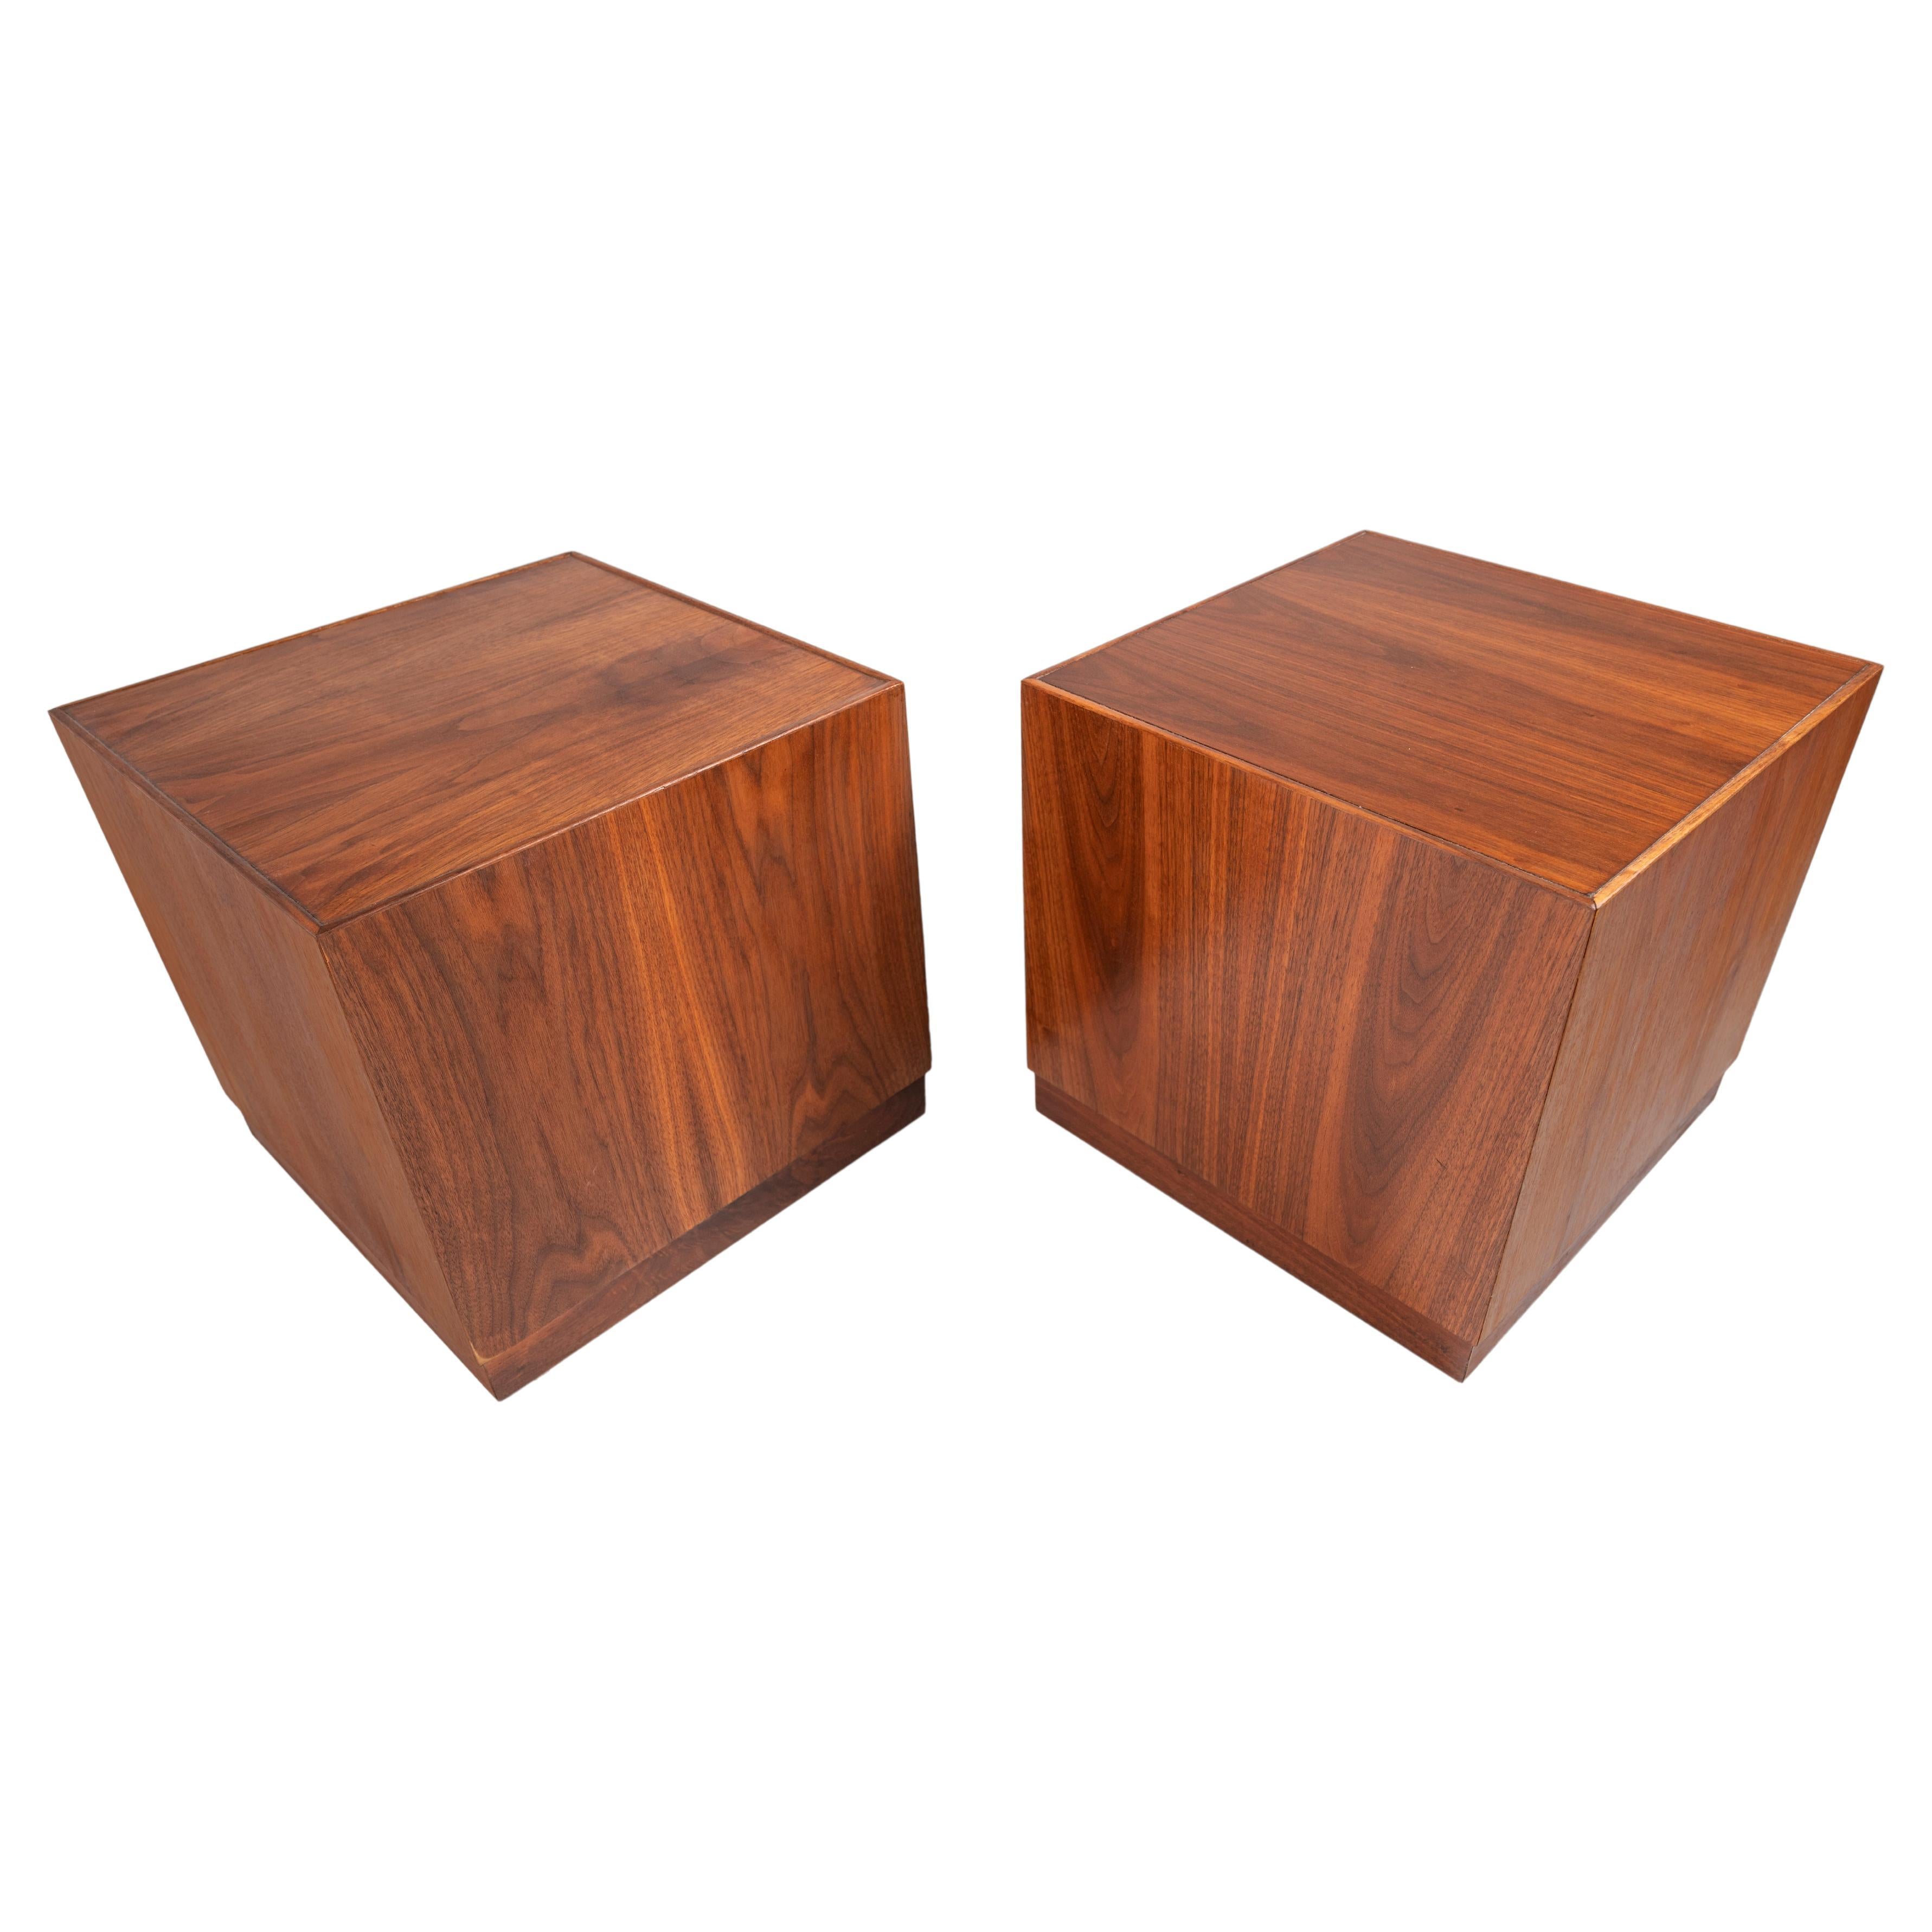 Set of Two (2) Modernist Cubes / End Tables in Walnut After Milo Baughman, 1965